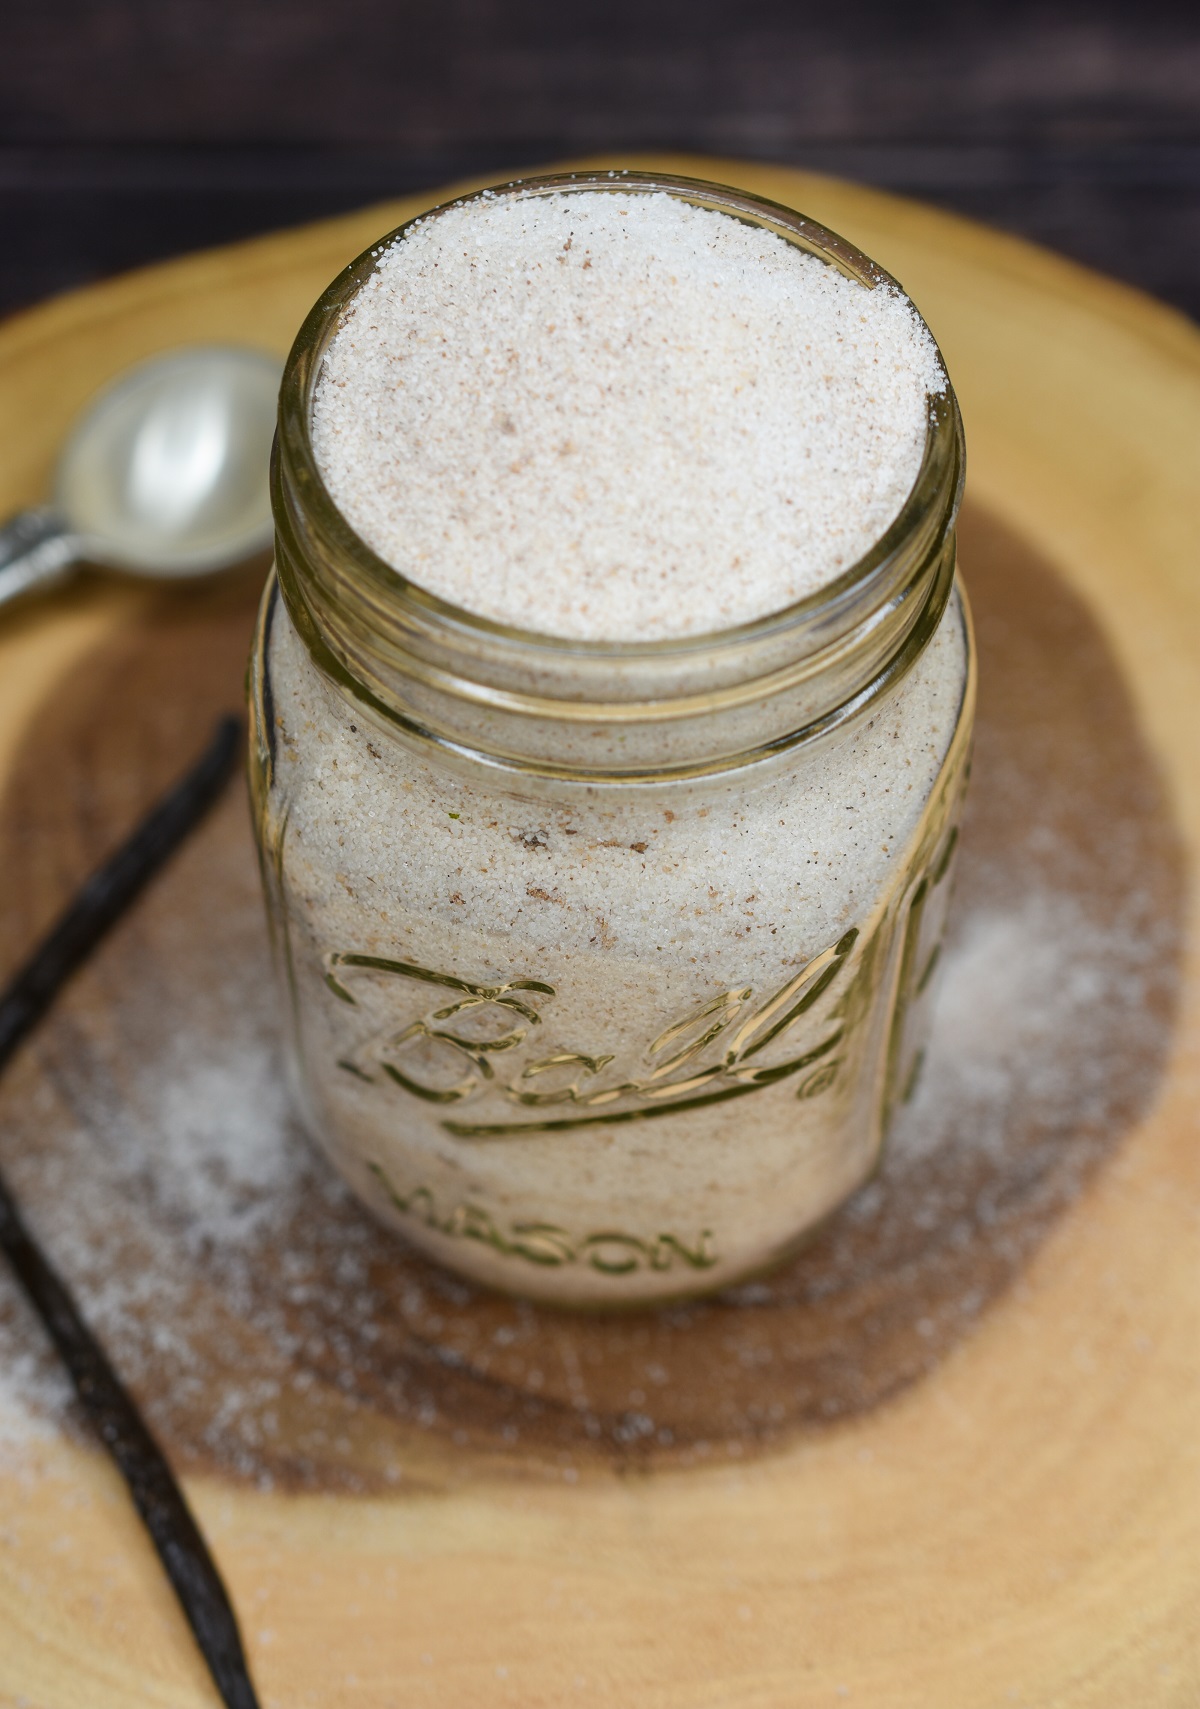 Spiced Sugar adds amazing flavor to your baked goods, coffee, tea & more Flavored Sugar.